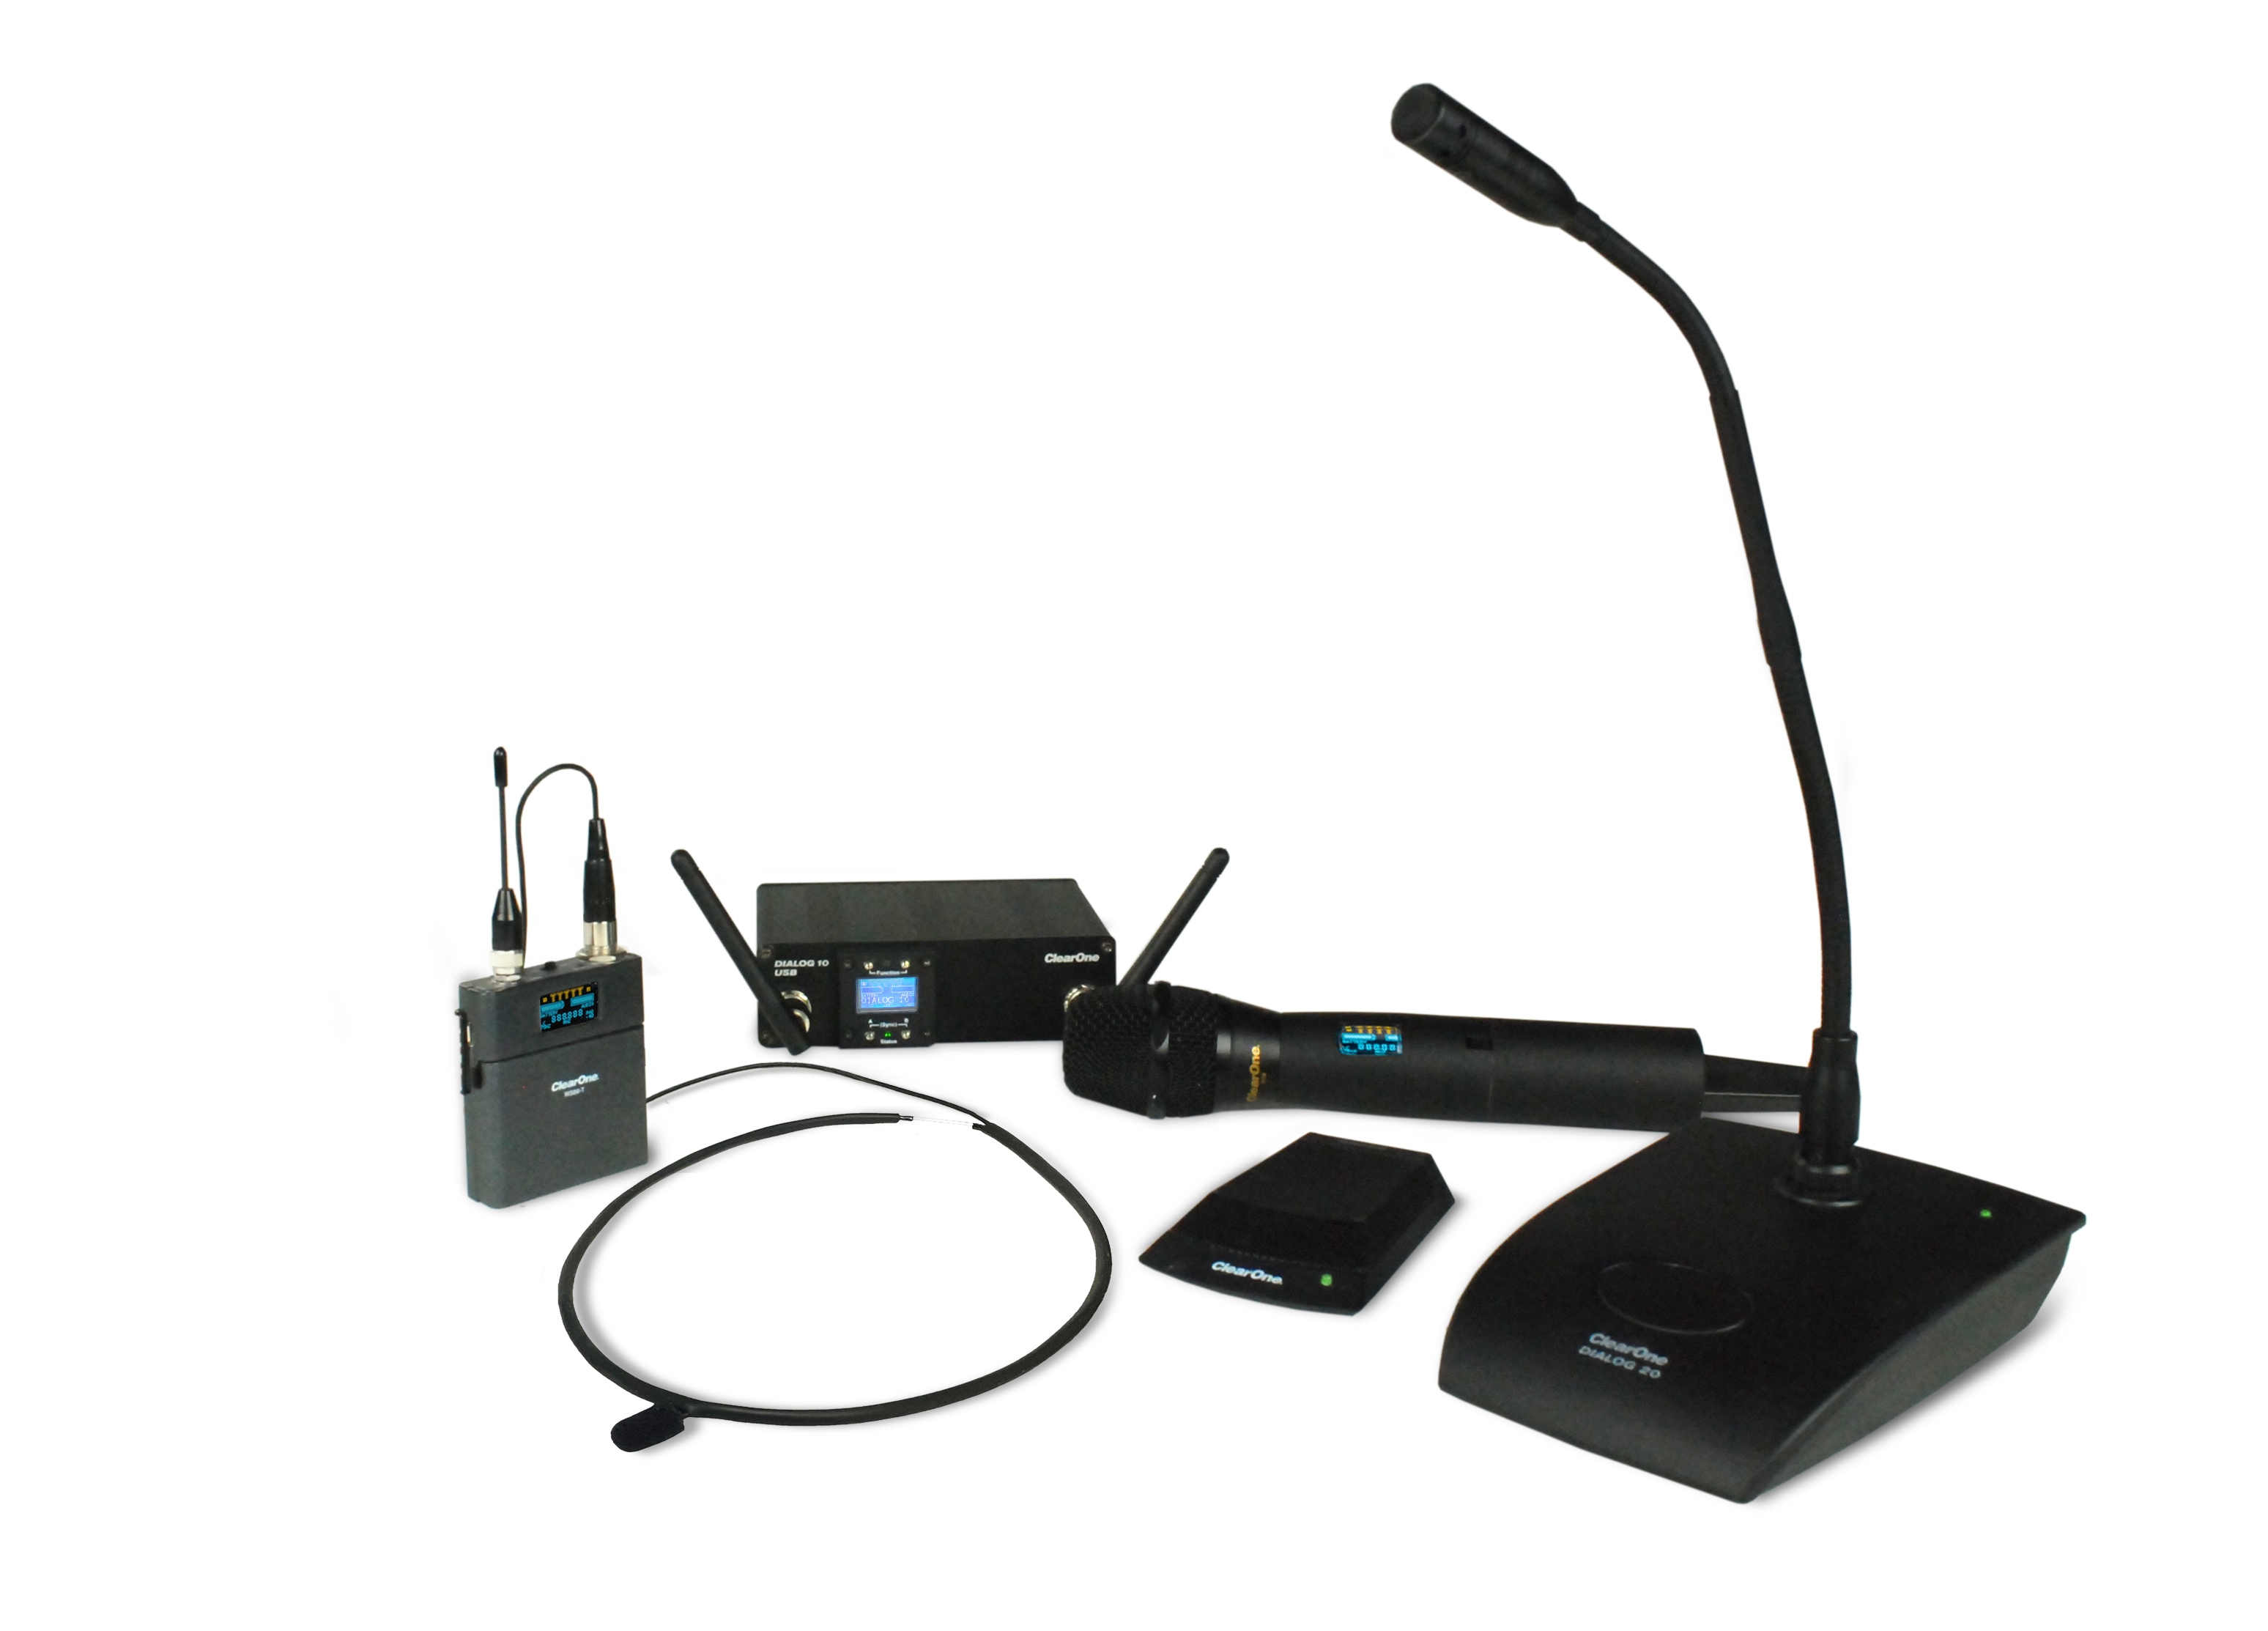 DIALOG 10 Wireless Microphone System Components